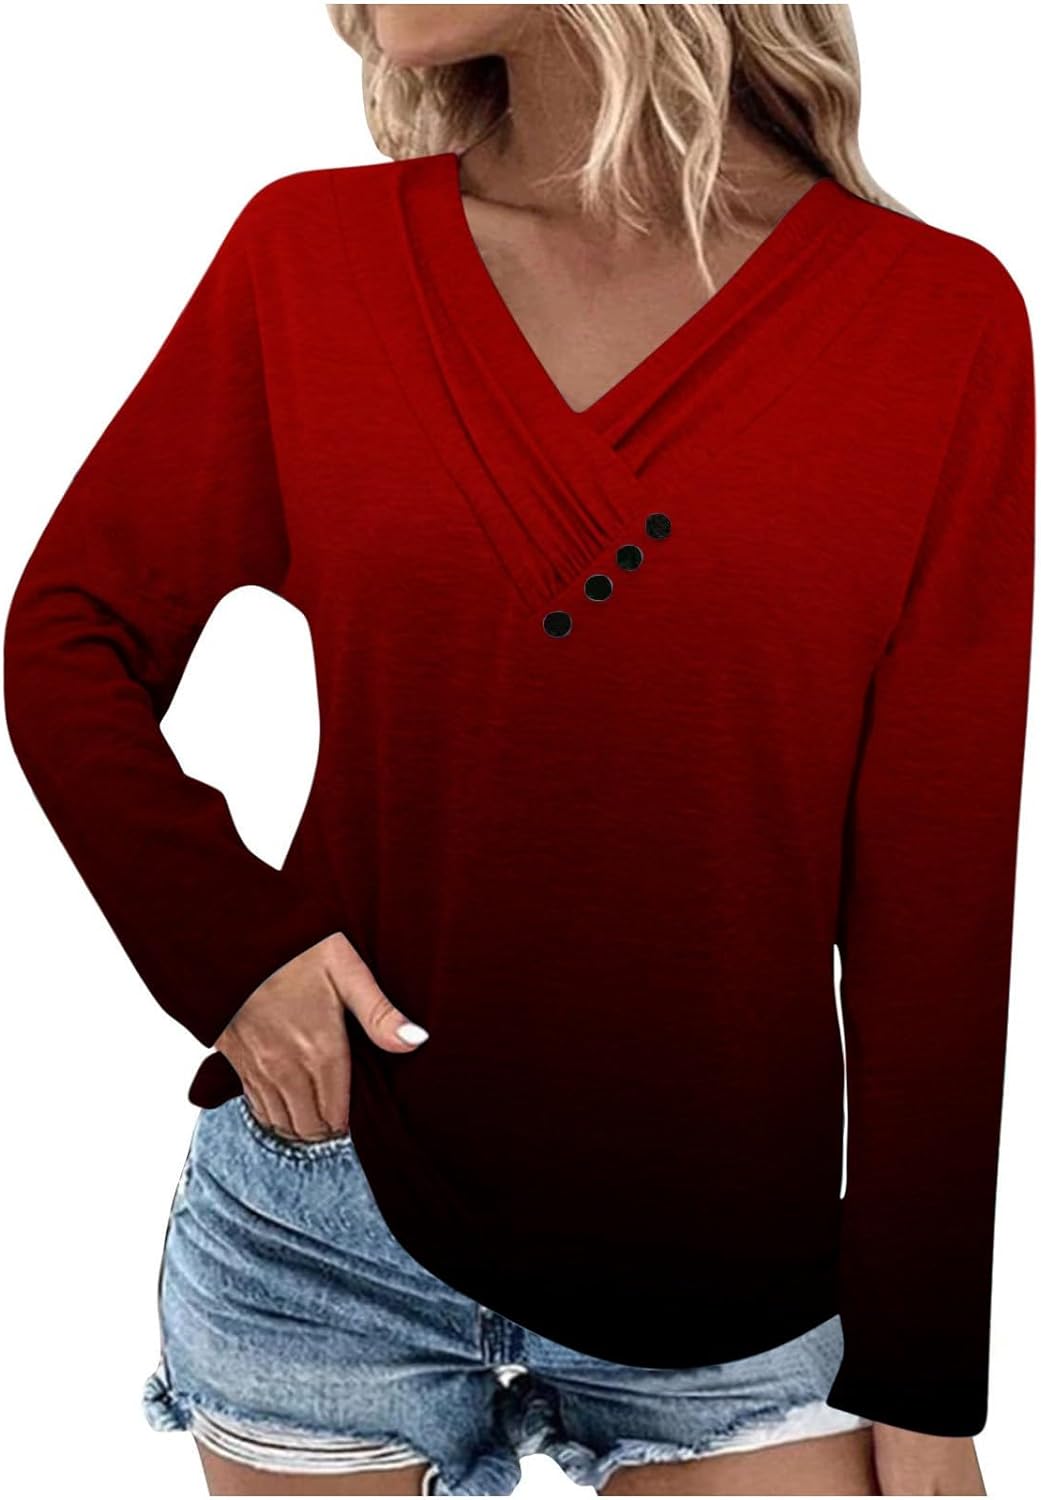 DPTALR Women Pleated V Neck Blouse with Button Full Sleeve Graphic Tee Pullover Blouse Ruffle Hem Sweatshirt Button Tunic